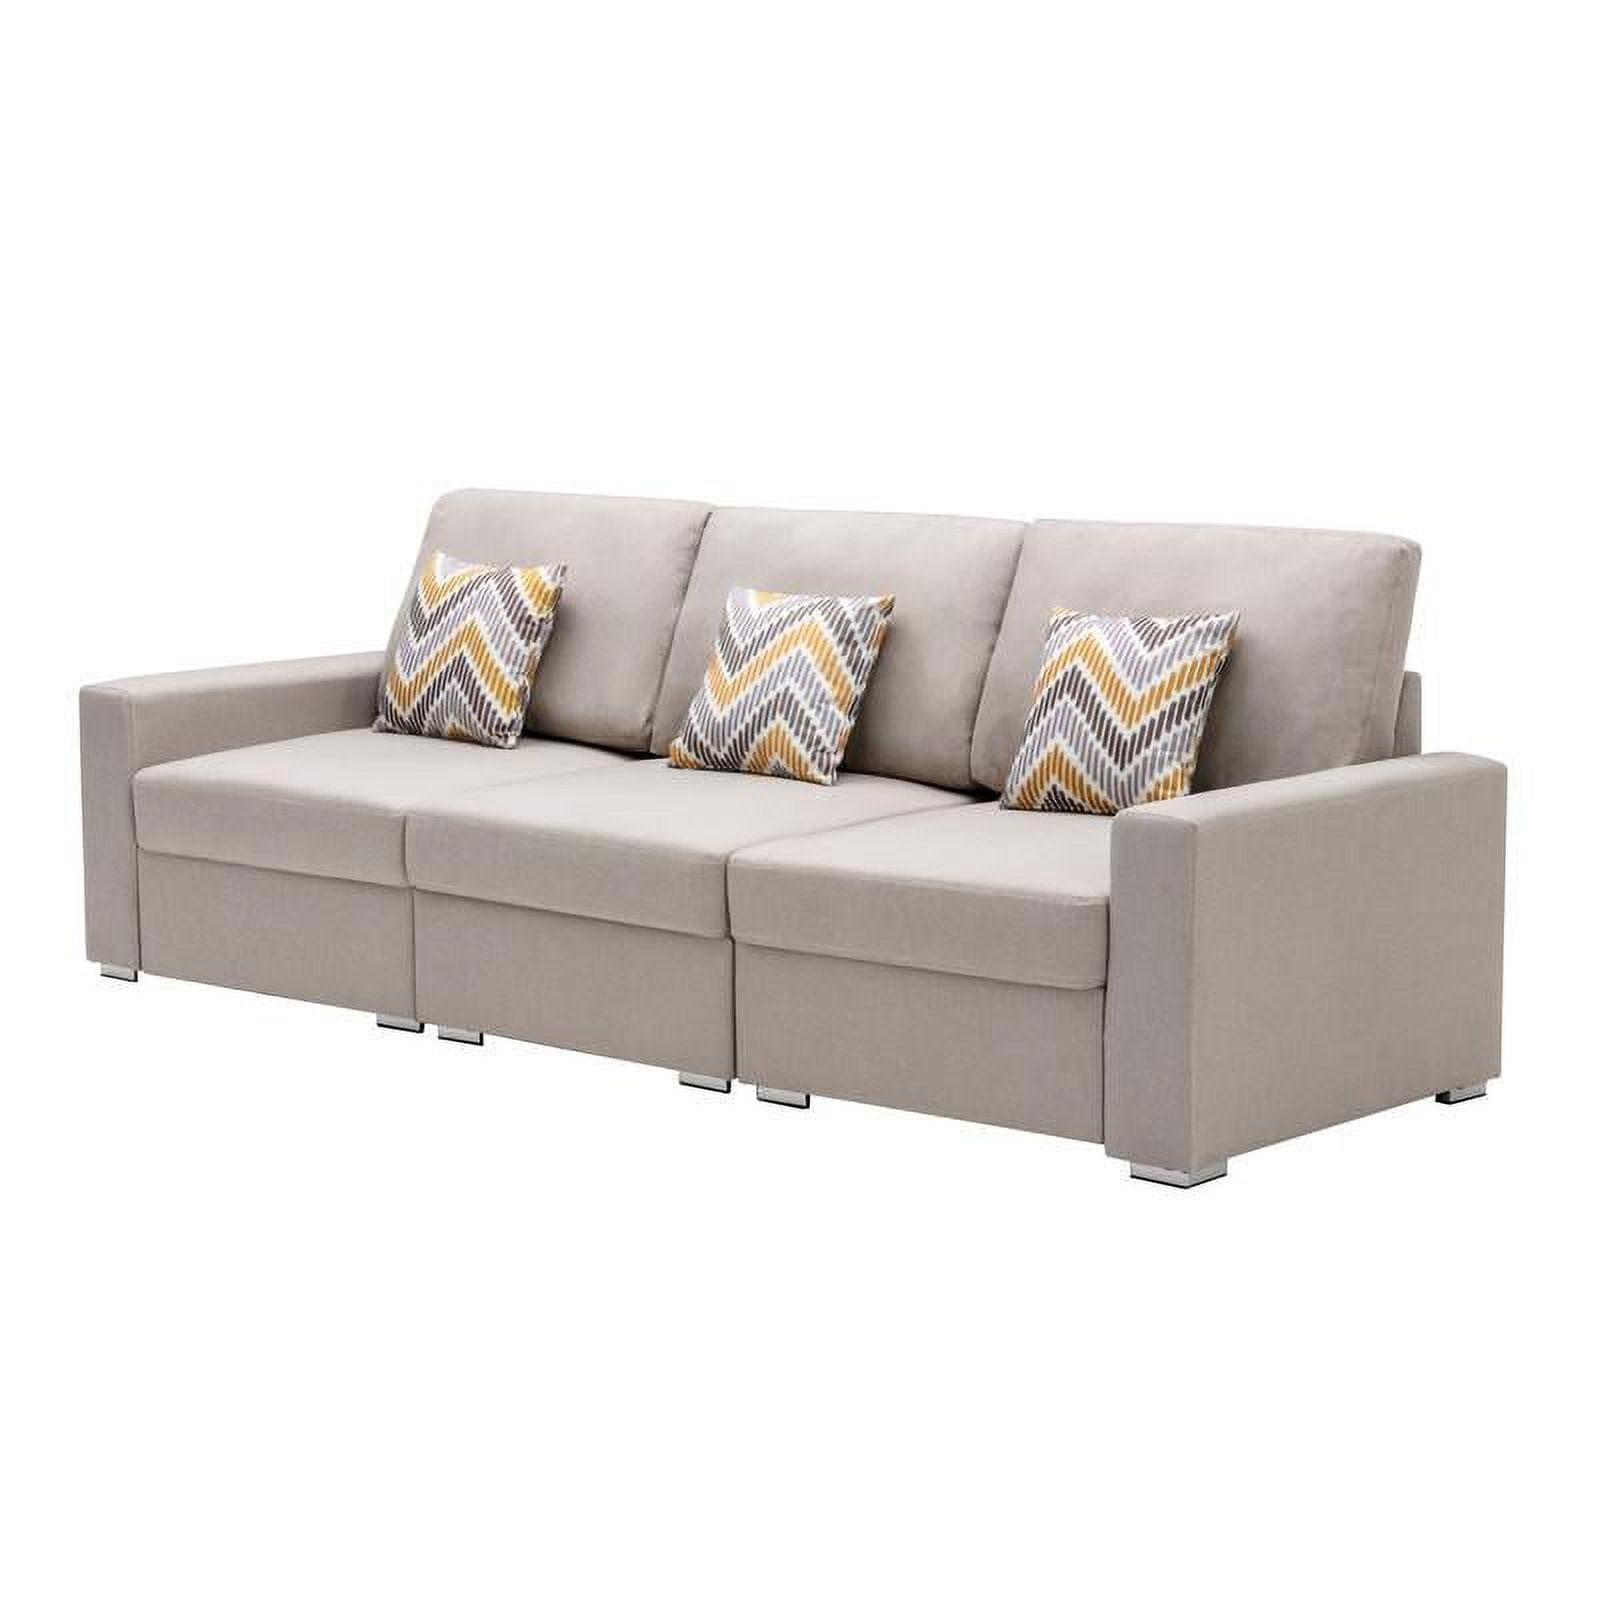 Nolan 95.5'' Beige Linen Fabric Sofa with Interchangeable Legs and Accent Pillows